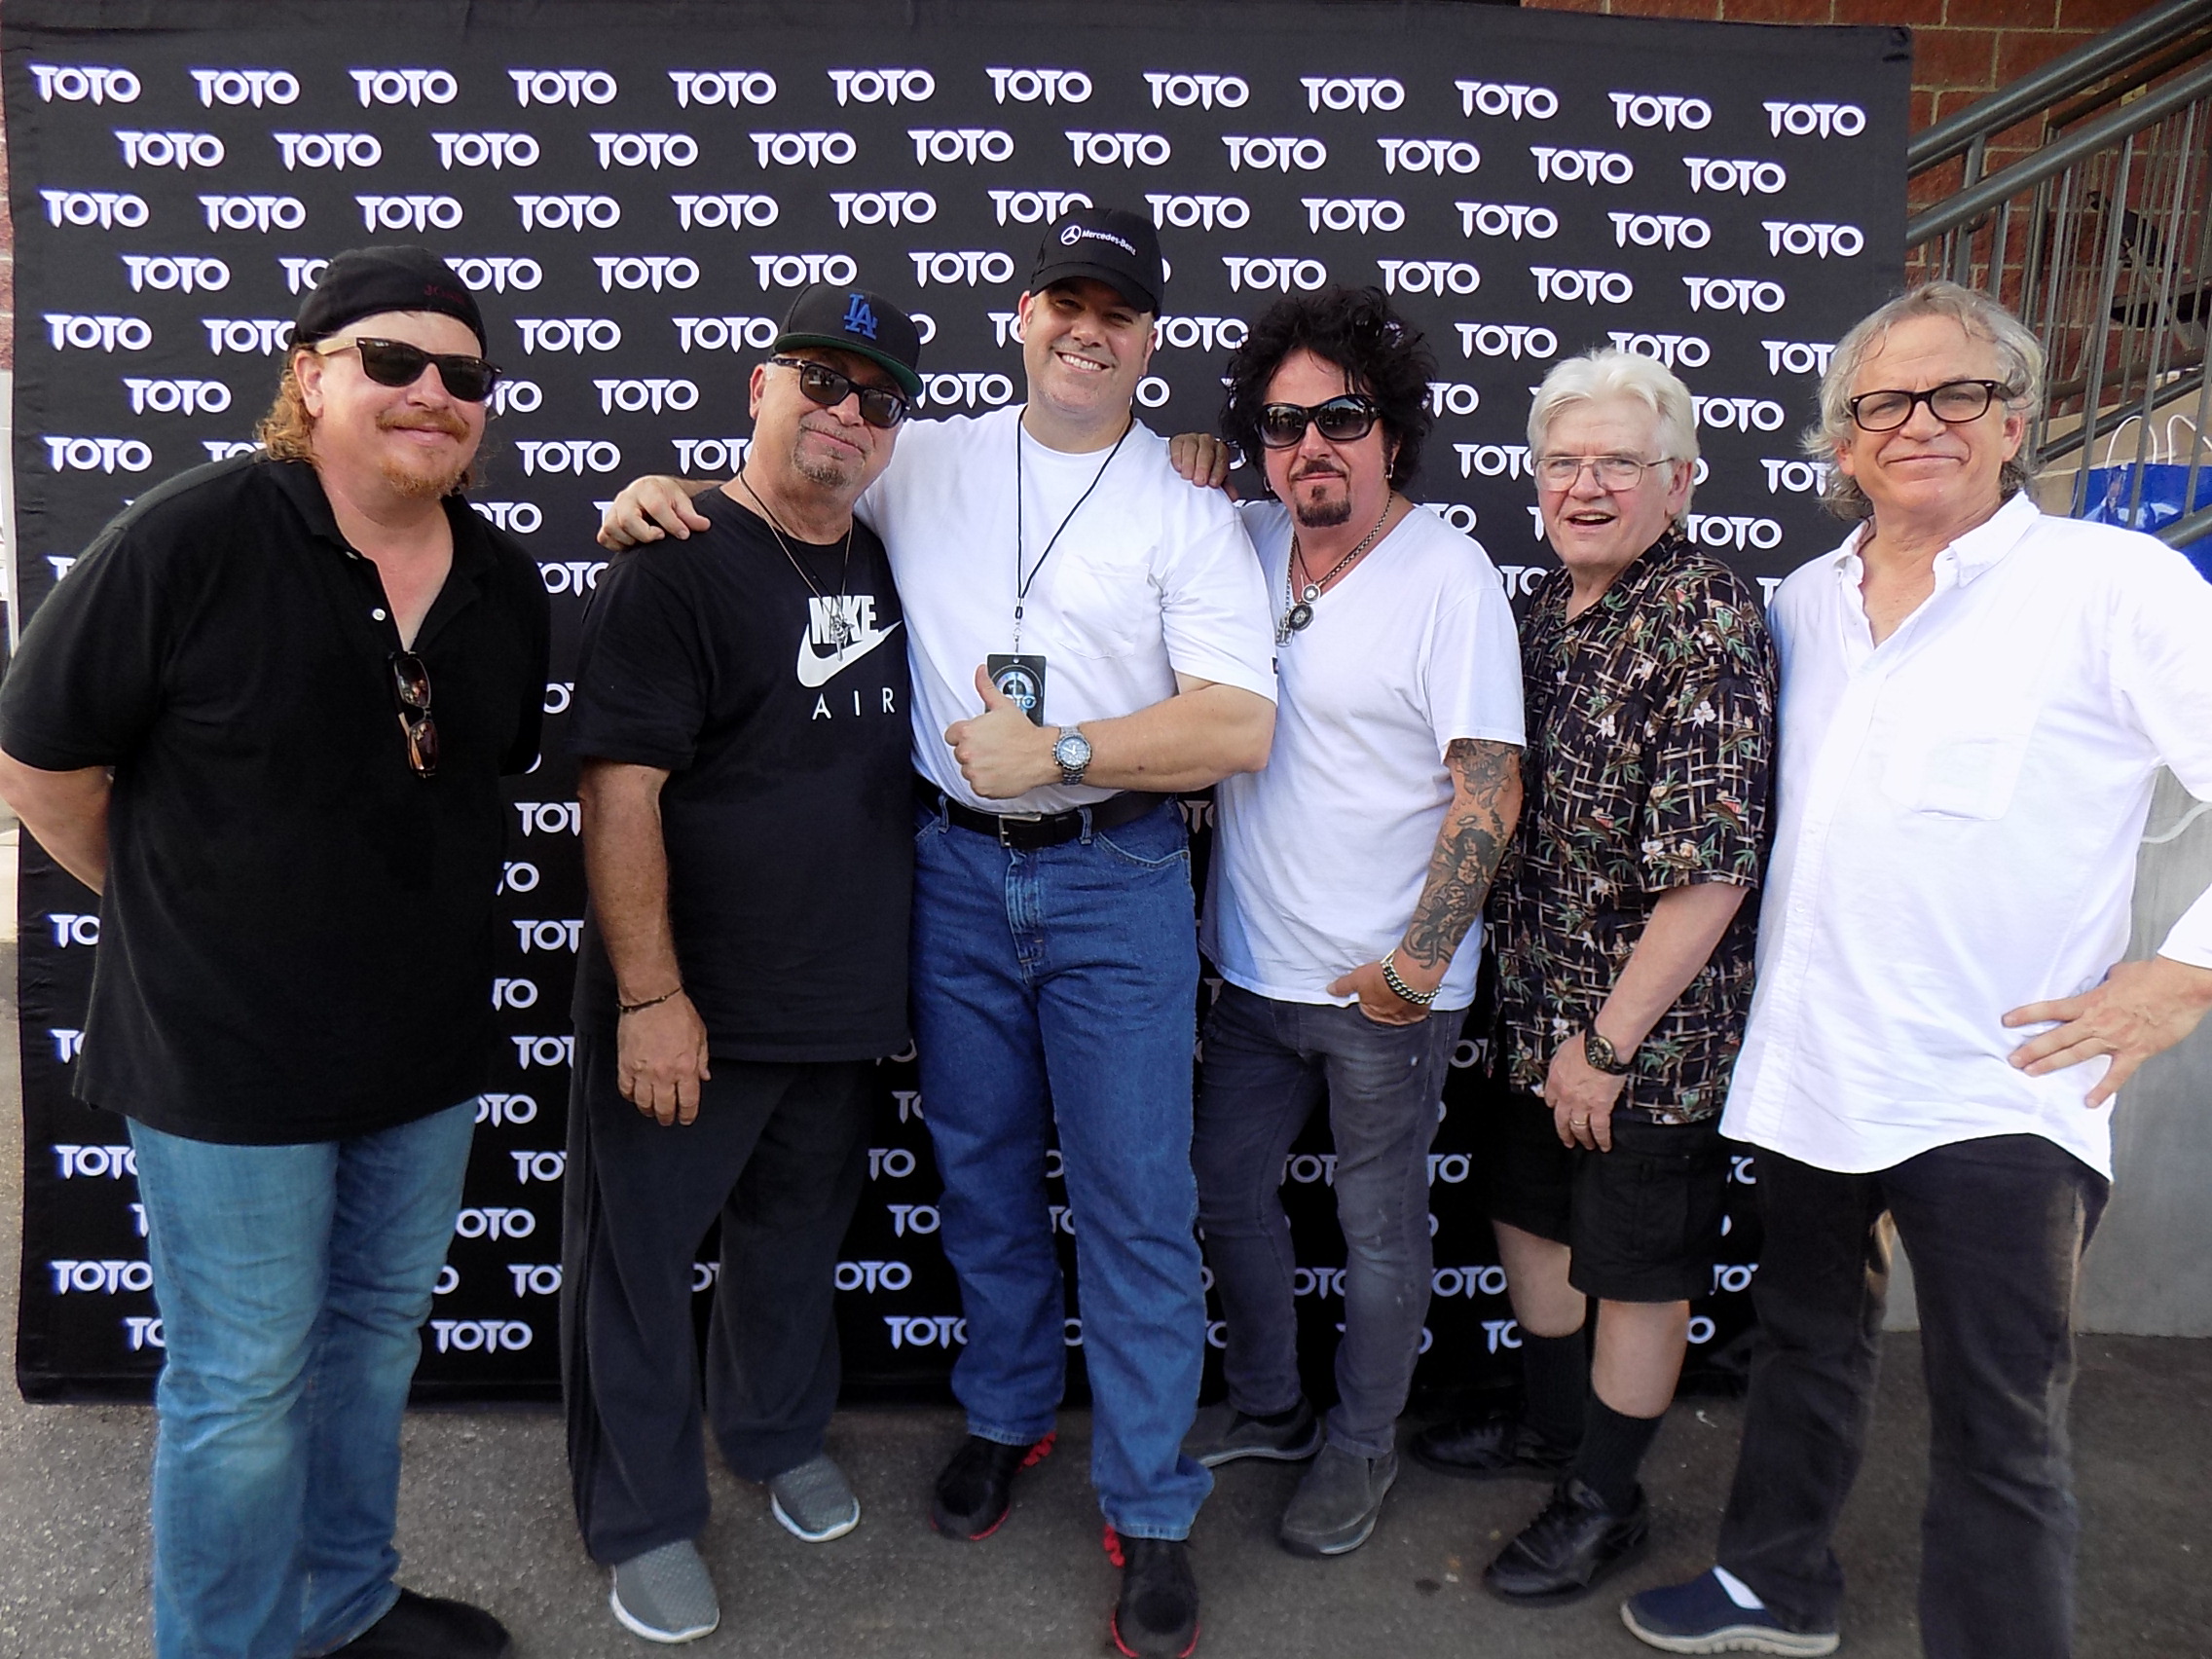 Darren W. Conrad with the band, TOTO. August 22, 2015.